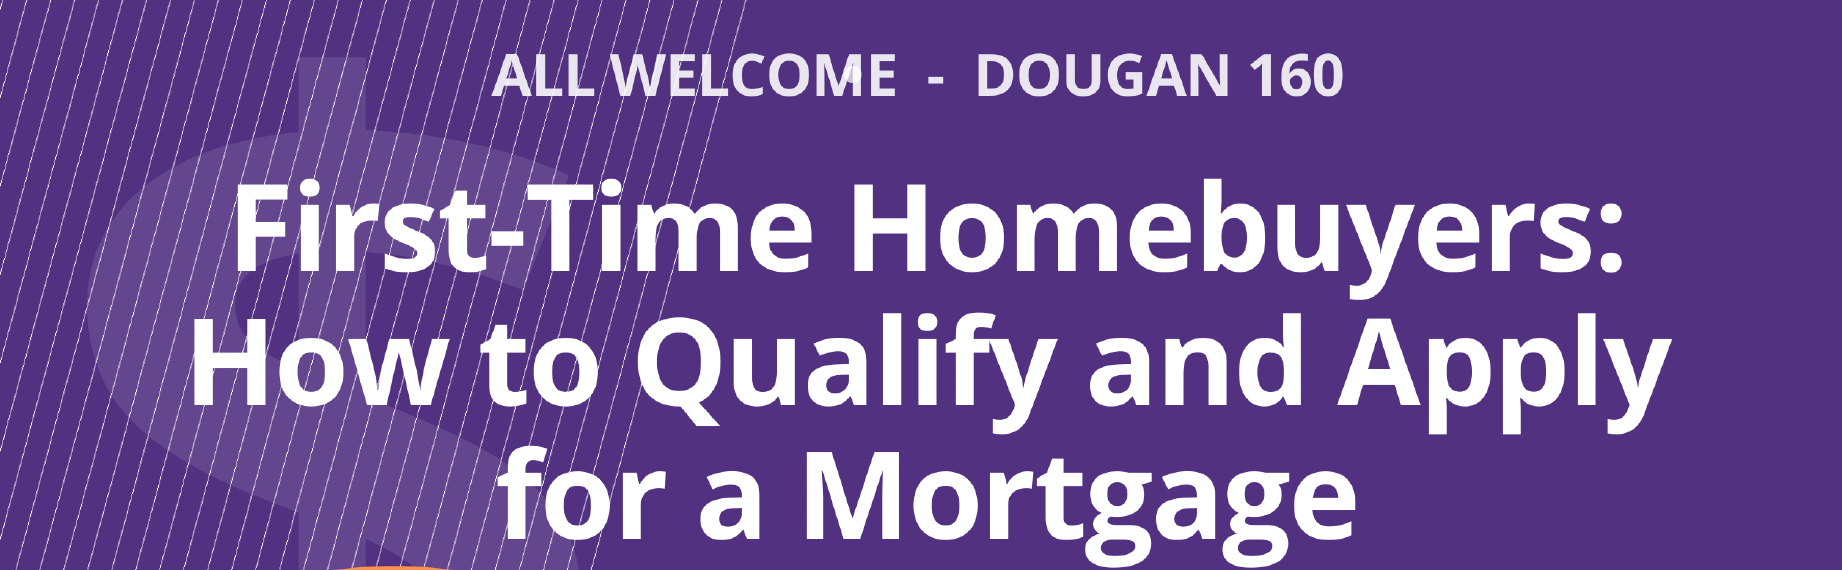 First-Time Homebuyers: How to Qualify and Apply for a Mortgage